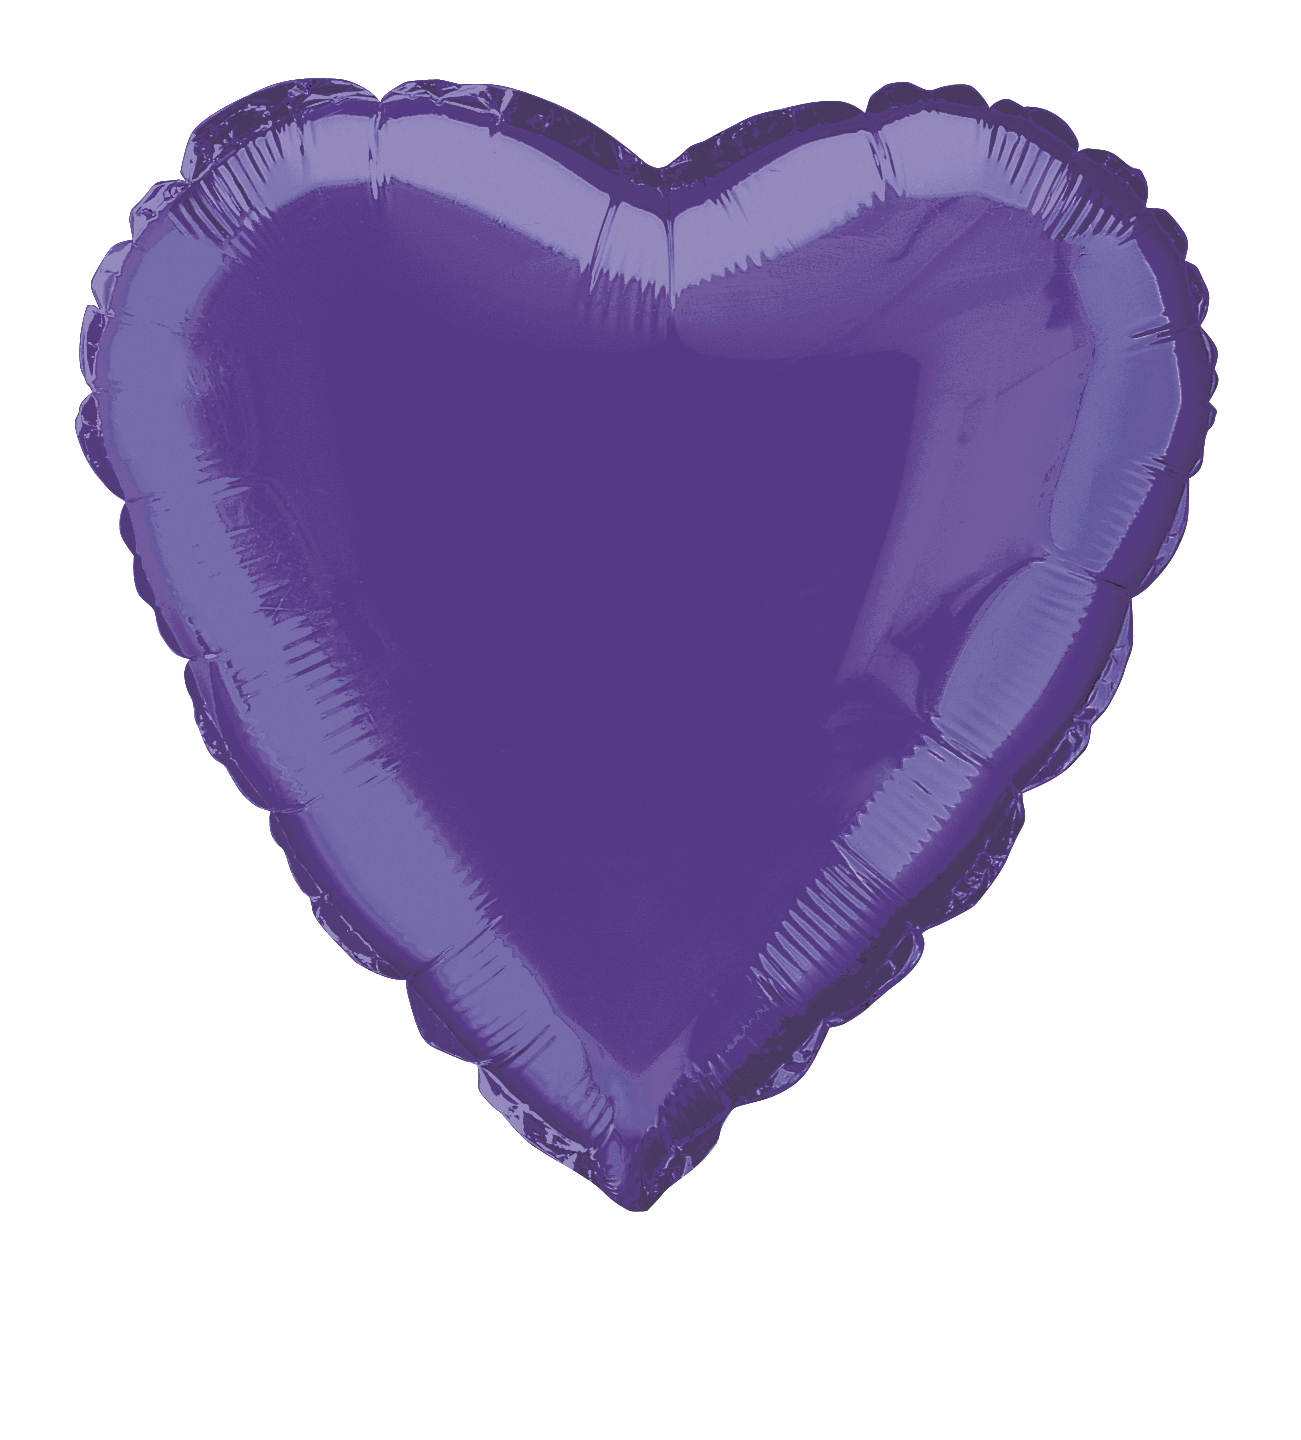 18" HEART SOLID DEEP PURPLE COLOR FOIL BALLOONS PRINTED 2 SIDES(Sold in 5s)